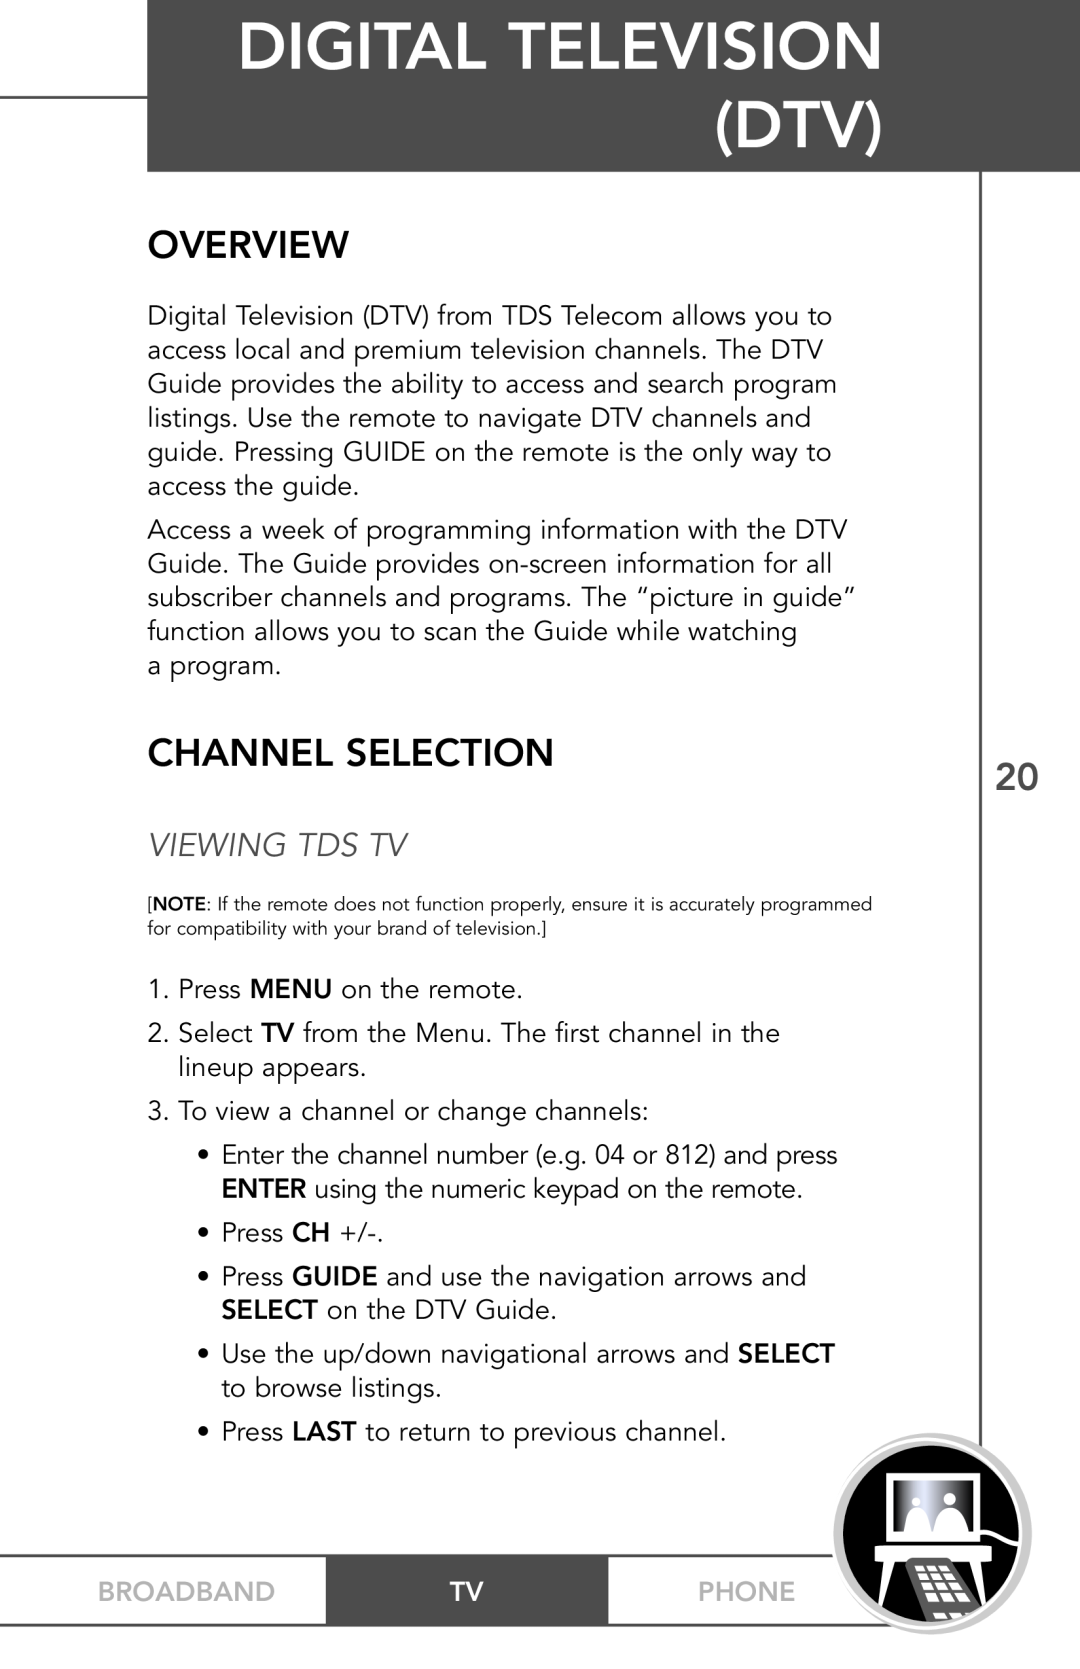 TV Guide On Screen PHONEBROADBAND TV Digital Television Dtv, Overview, Channel Selection, Viewing Tds Tv, Broadband, Phone 